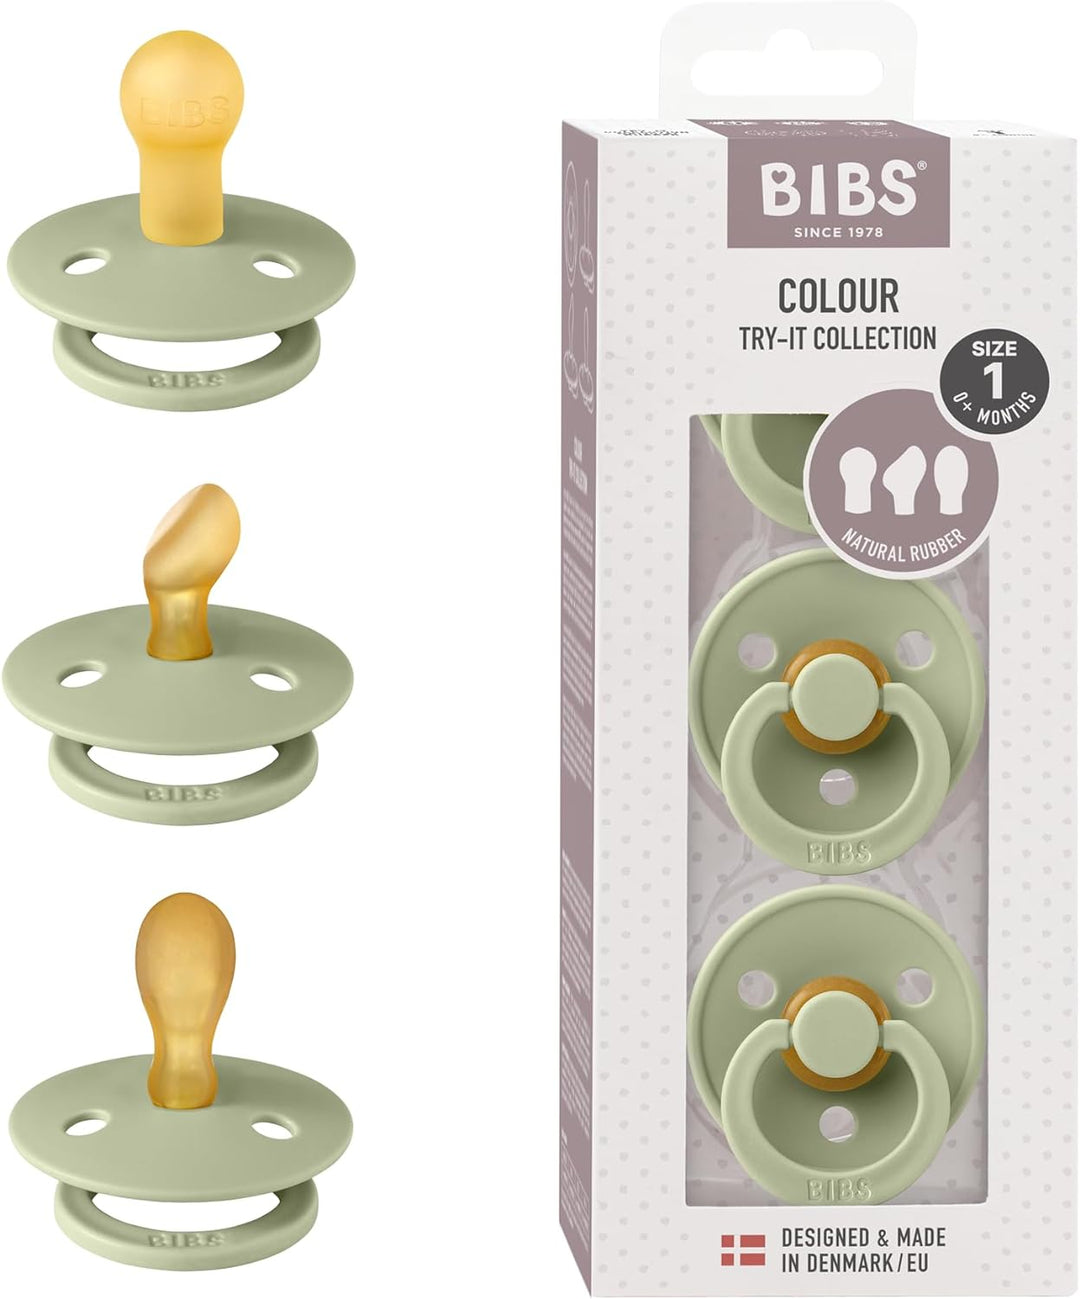 BIBS Colour Pacifiers - Try-It Collection - Pack of 3